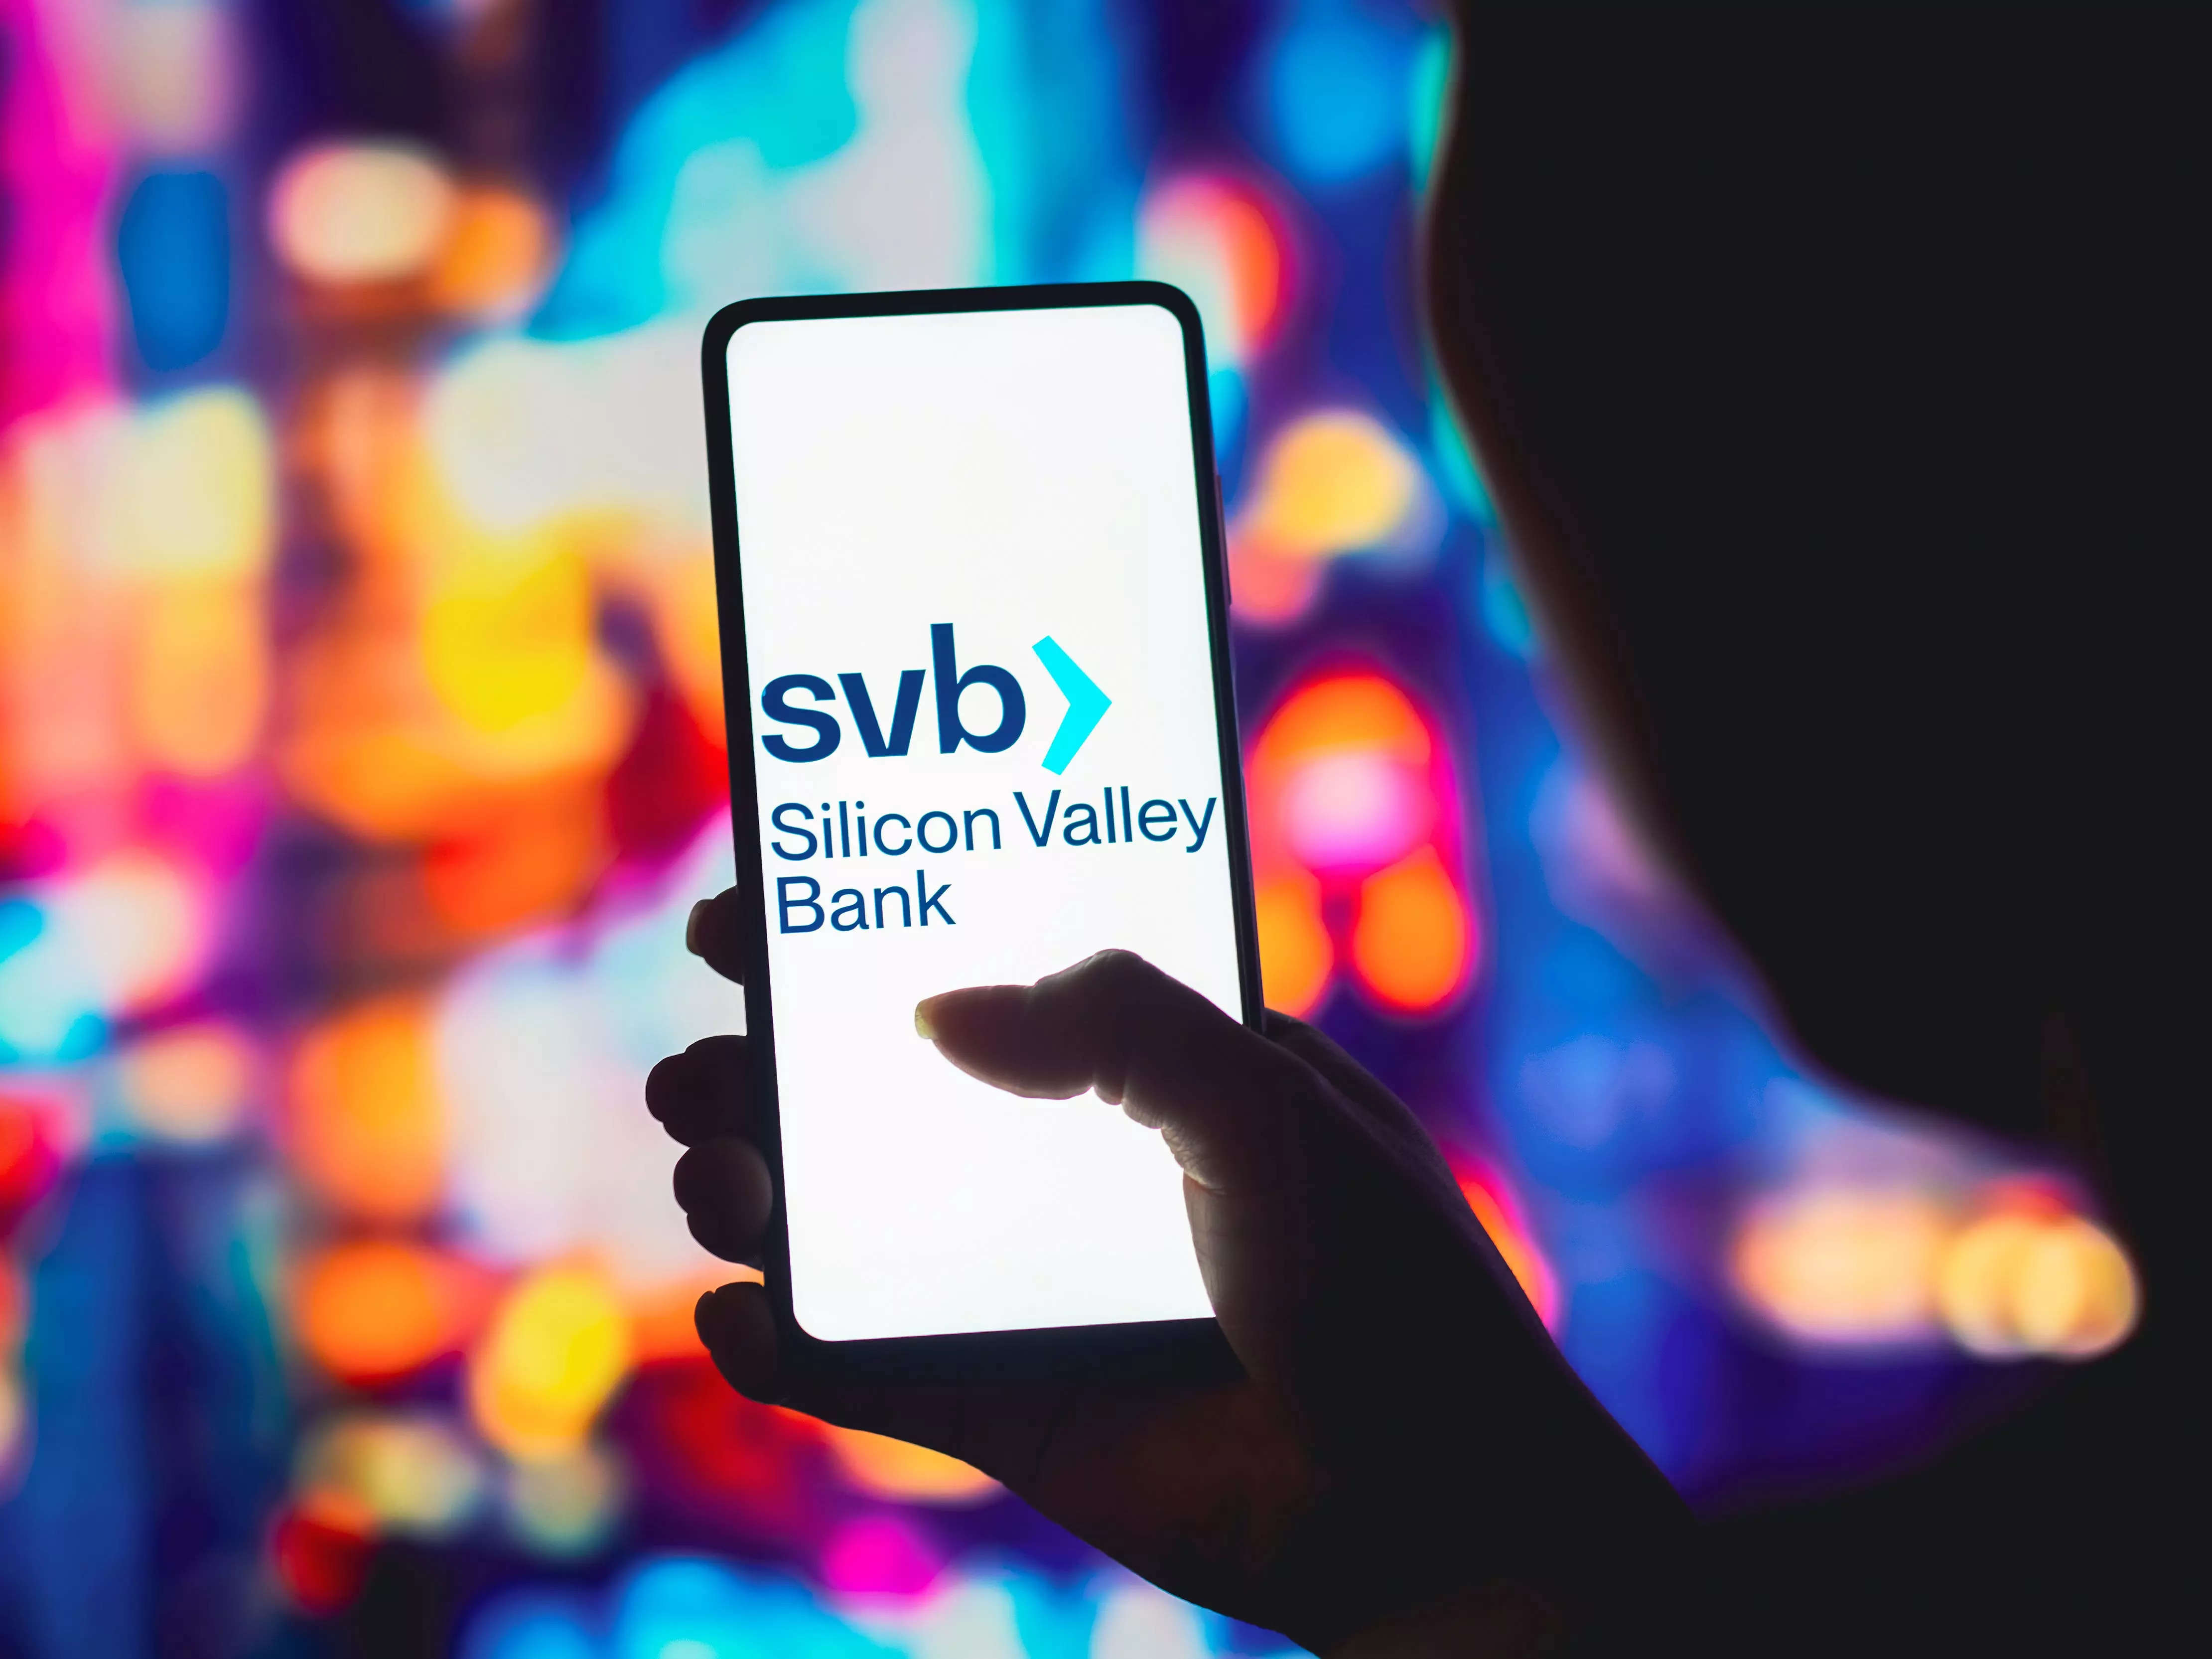 nypd called to silicon valley bank branch to respond to 'disorderly group' after svb's shocking collapse | business insider india